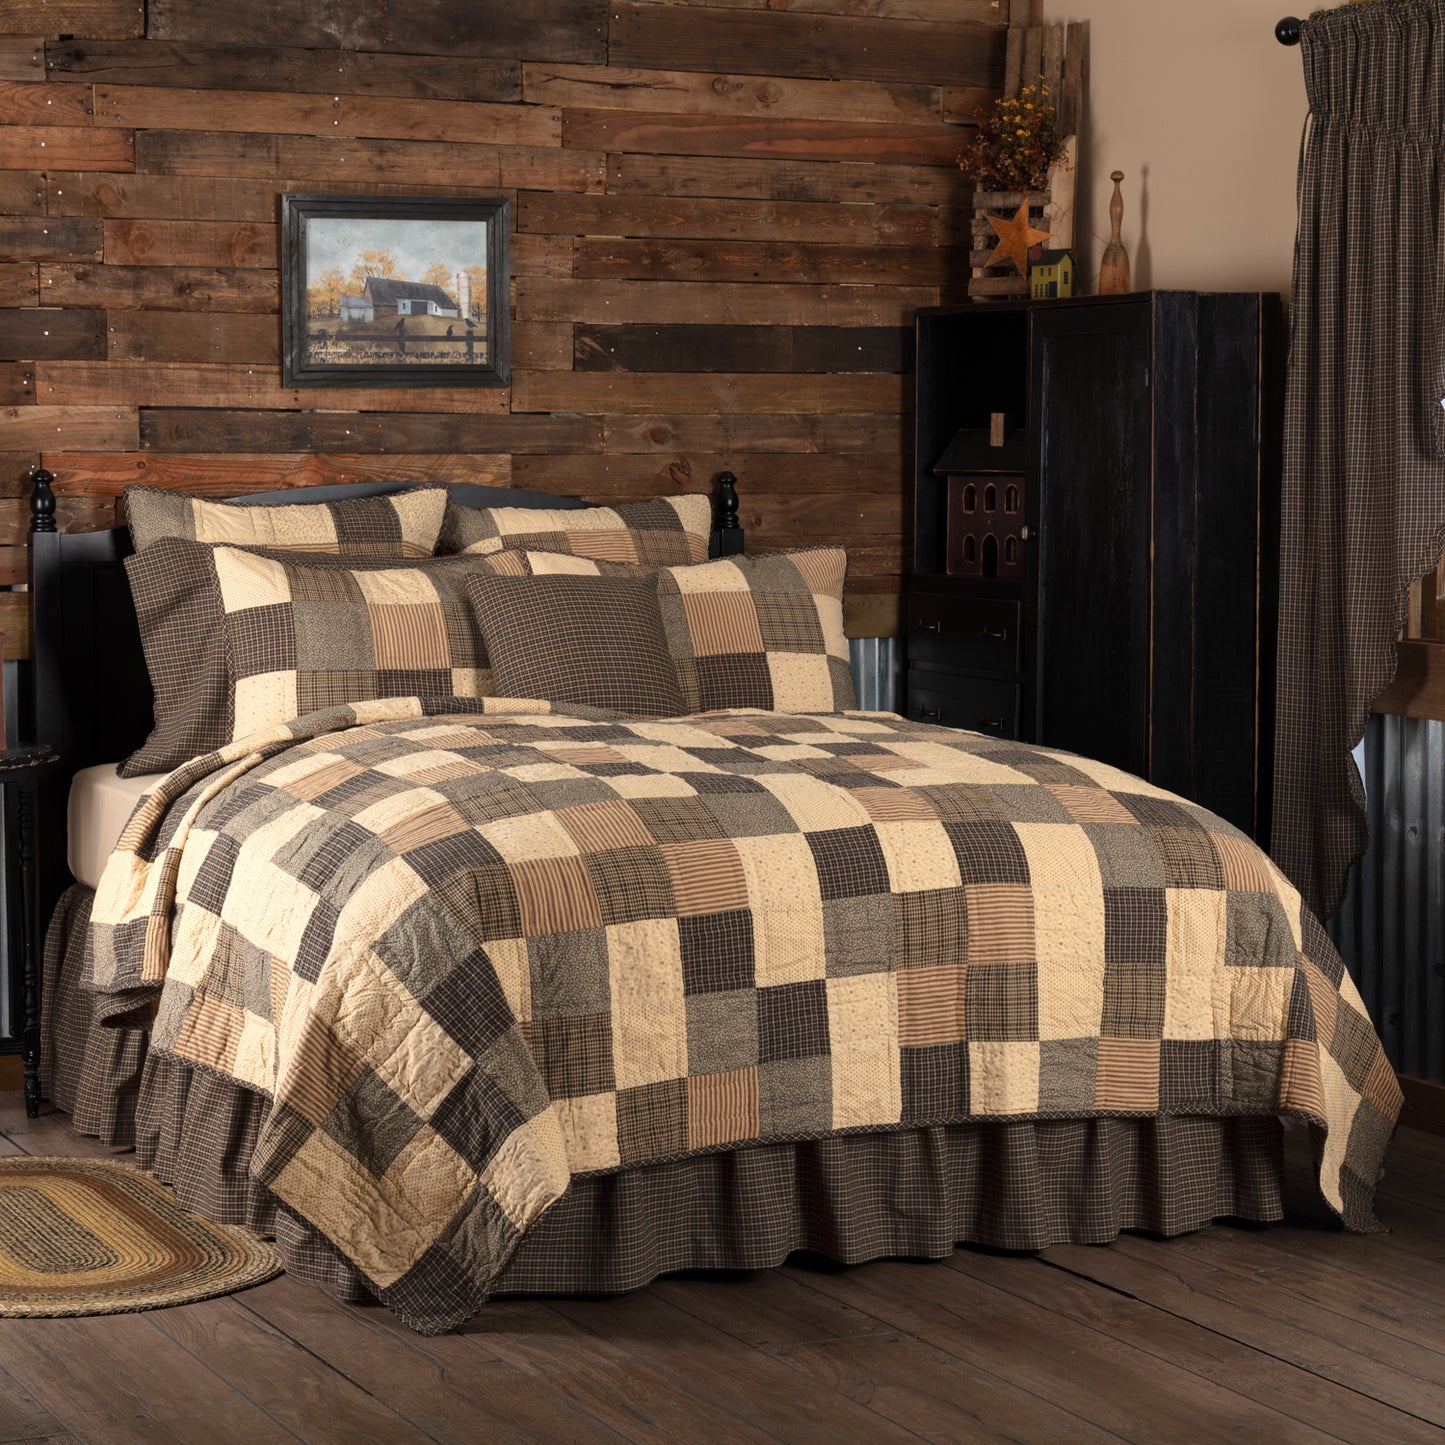 10146-Kettle-Grove-Luxury-King-Quilt-120Wx105L-image-5